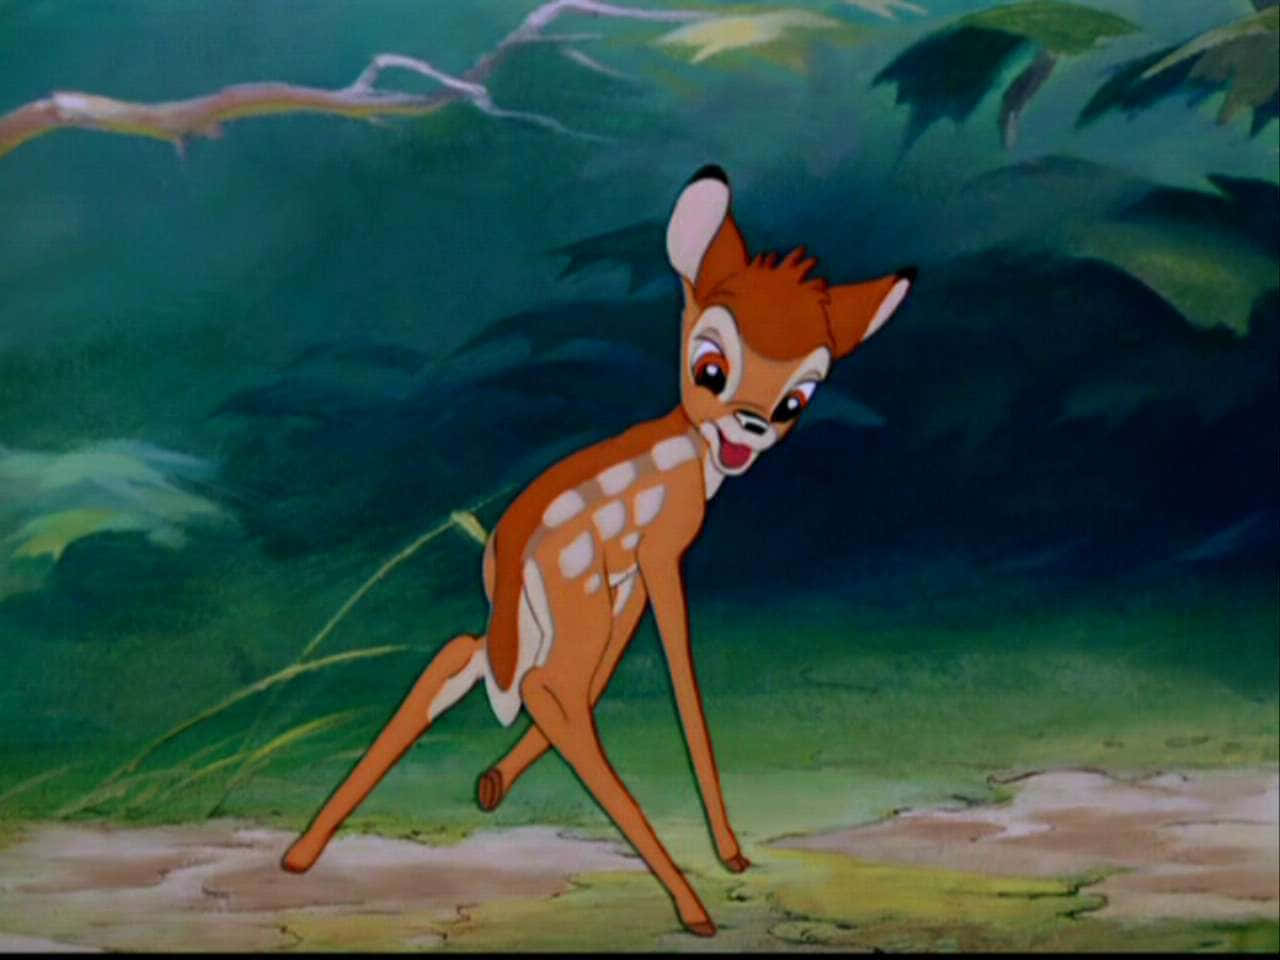 Bambi, the beloved Disney character, is ready to explore the forest!